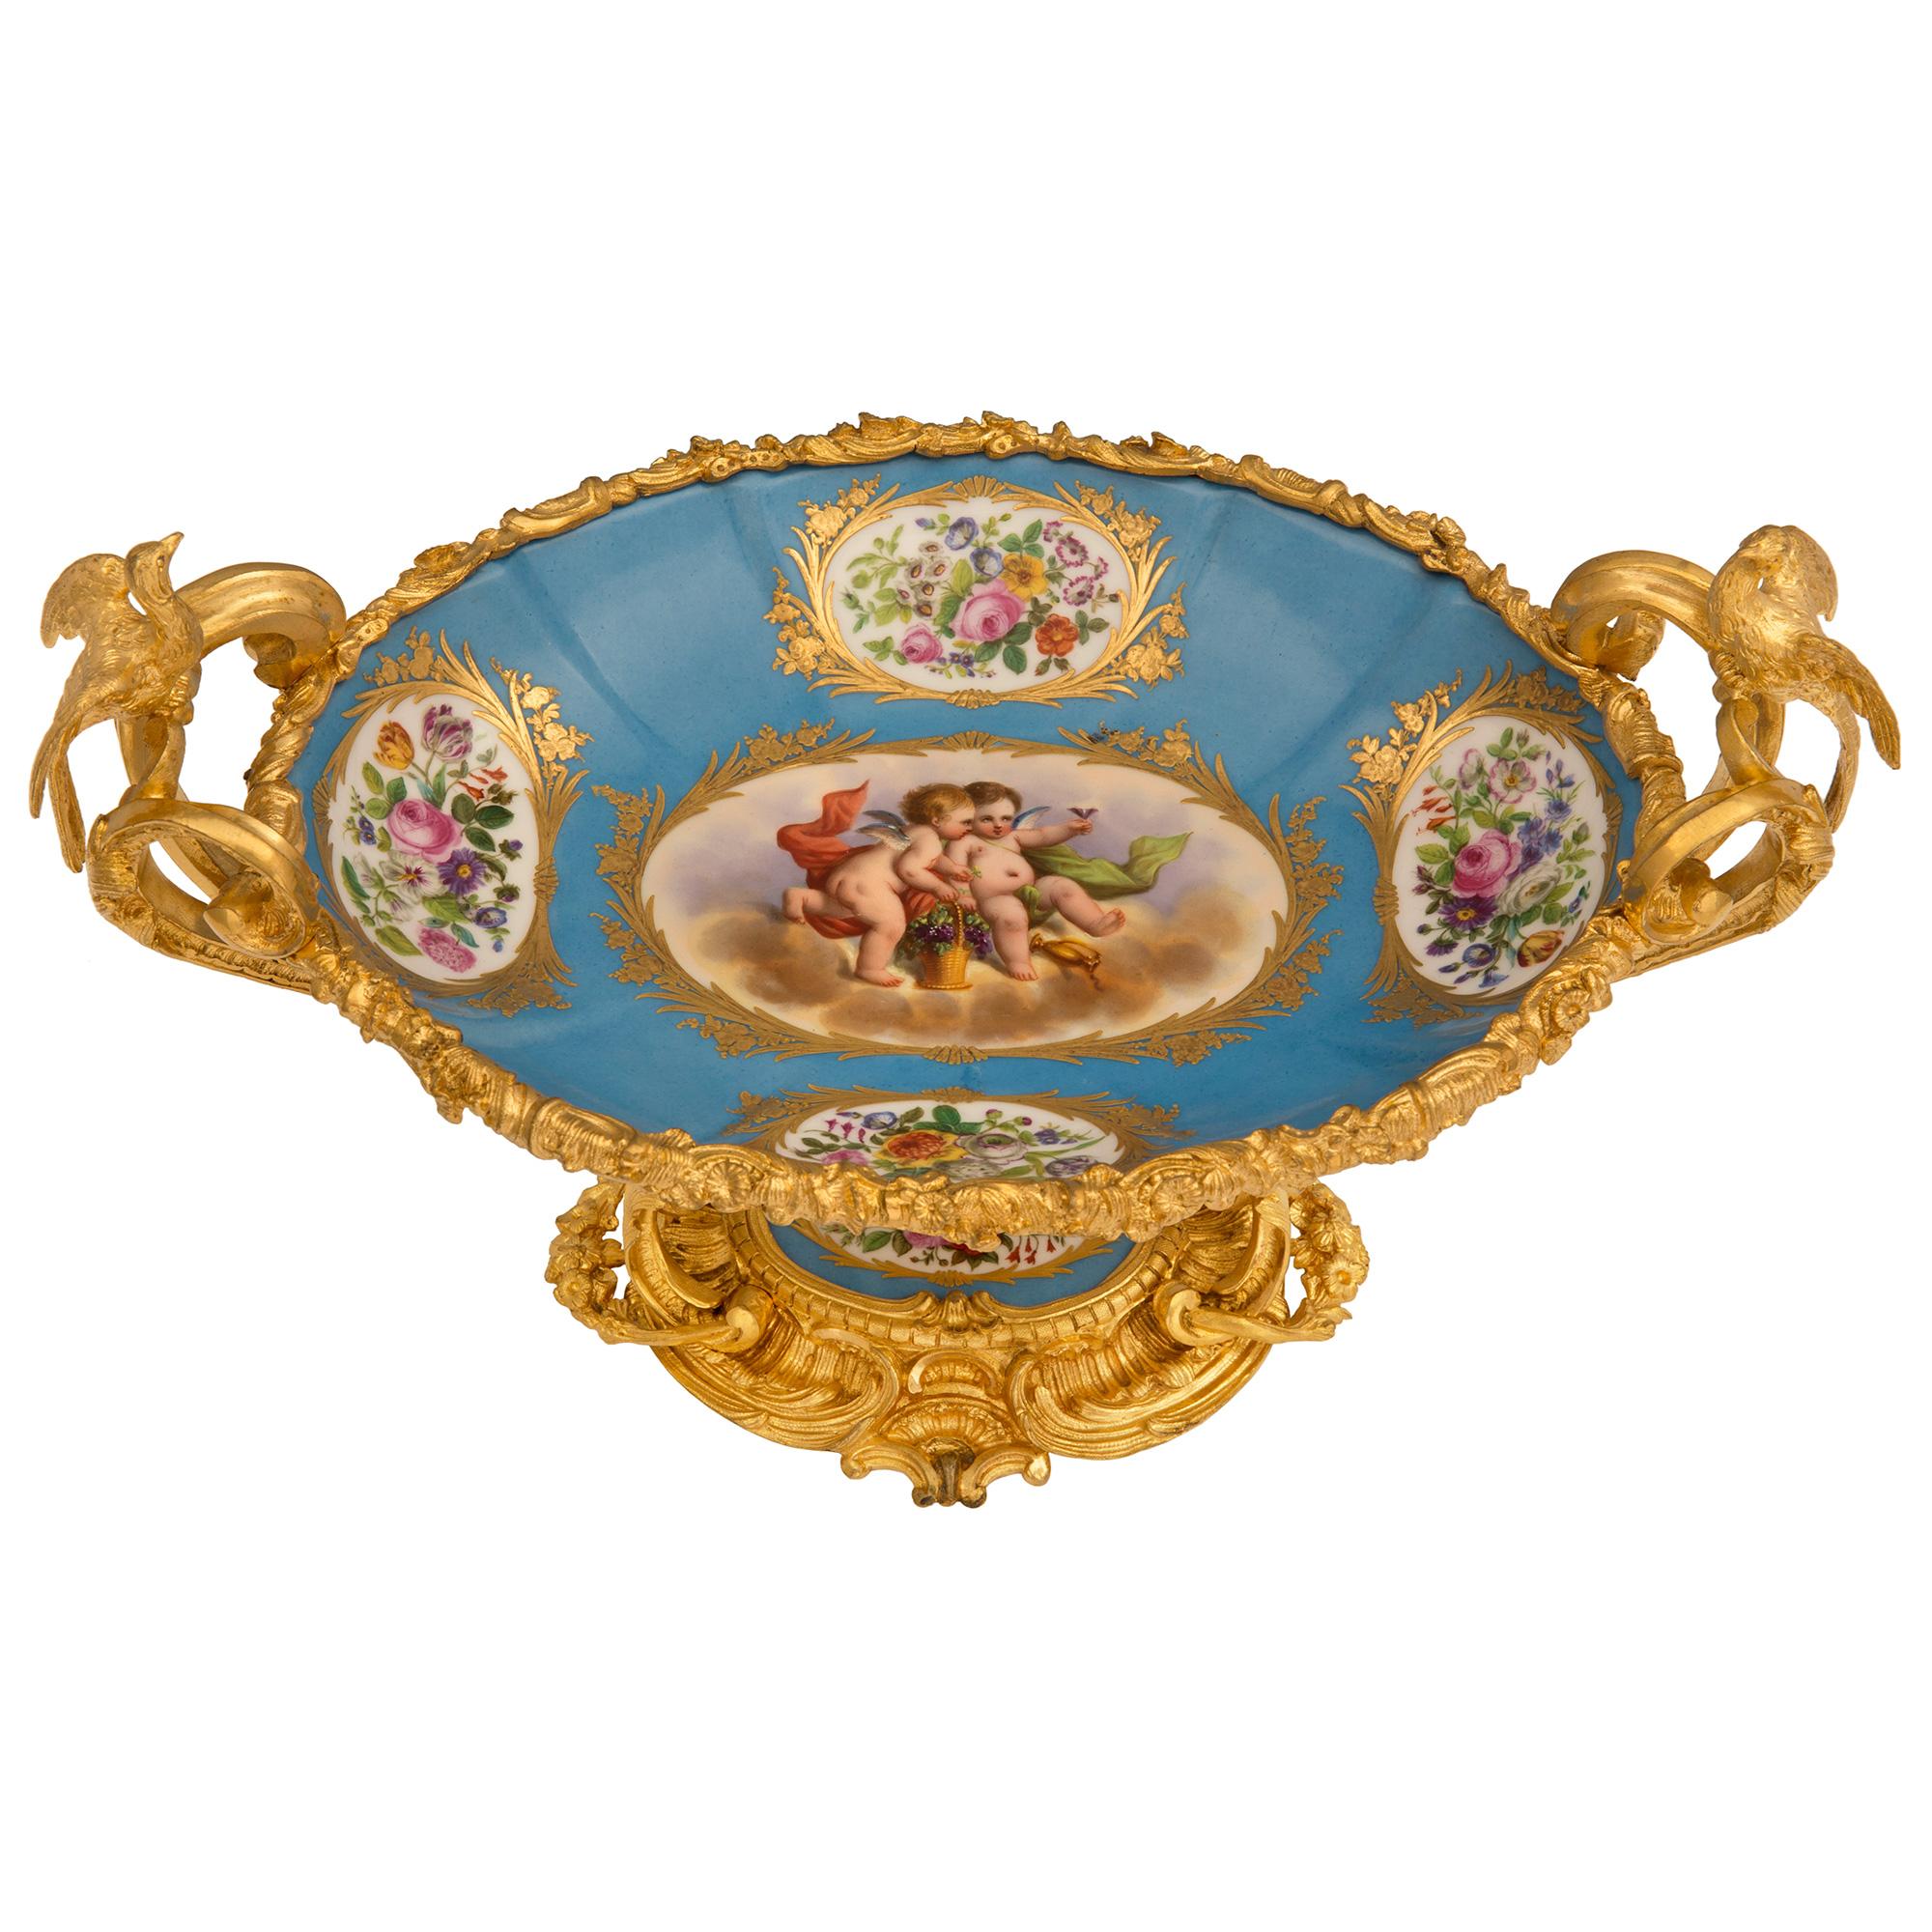 An elegant French 19th century Louis XV st. ormolu and Sèvres porcelain centerpiece. The centerpiece is raised by an exquisite oval shaped ormolu base with richly chased seashells and beautiful foliate movements in a satin and burnished finish. The